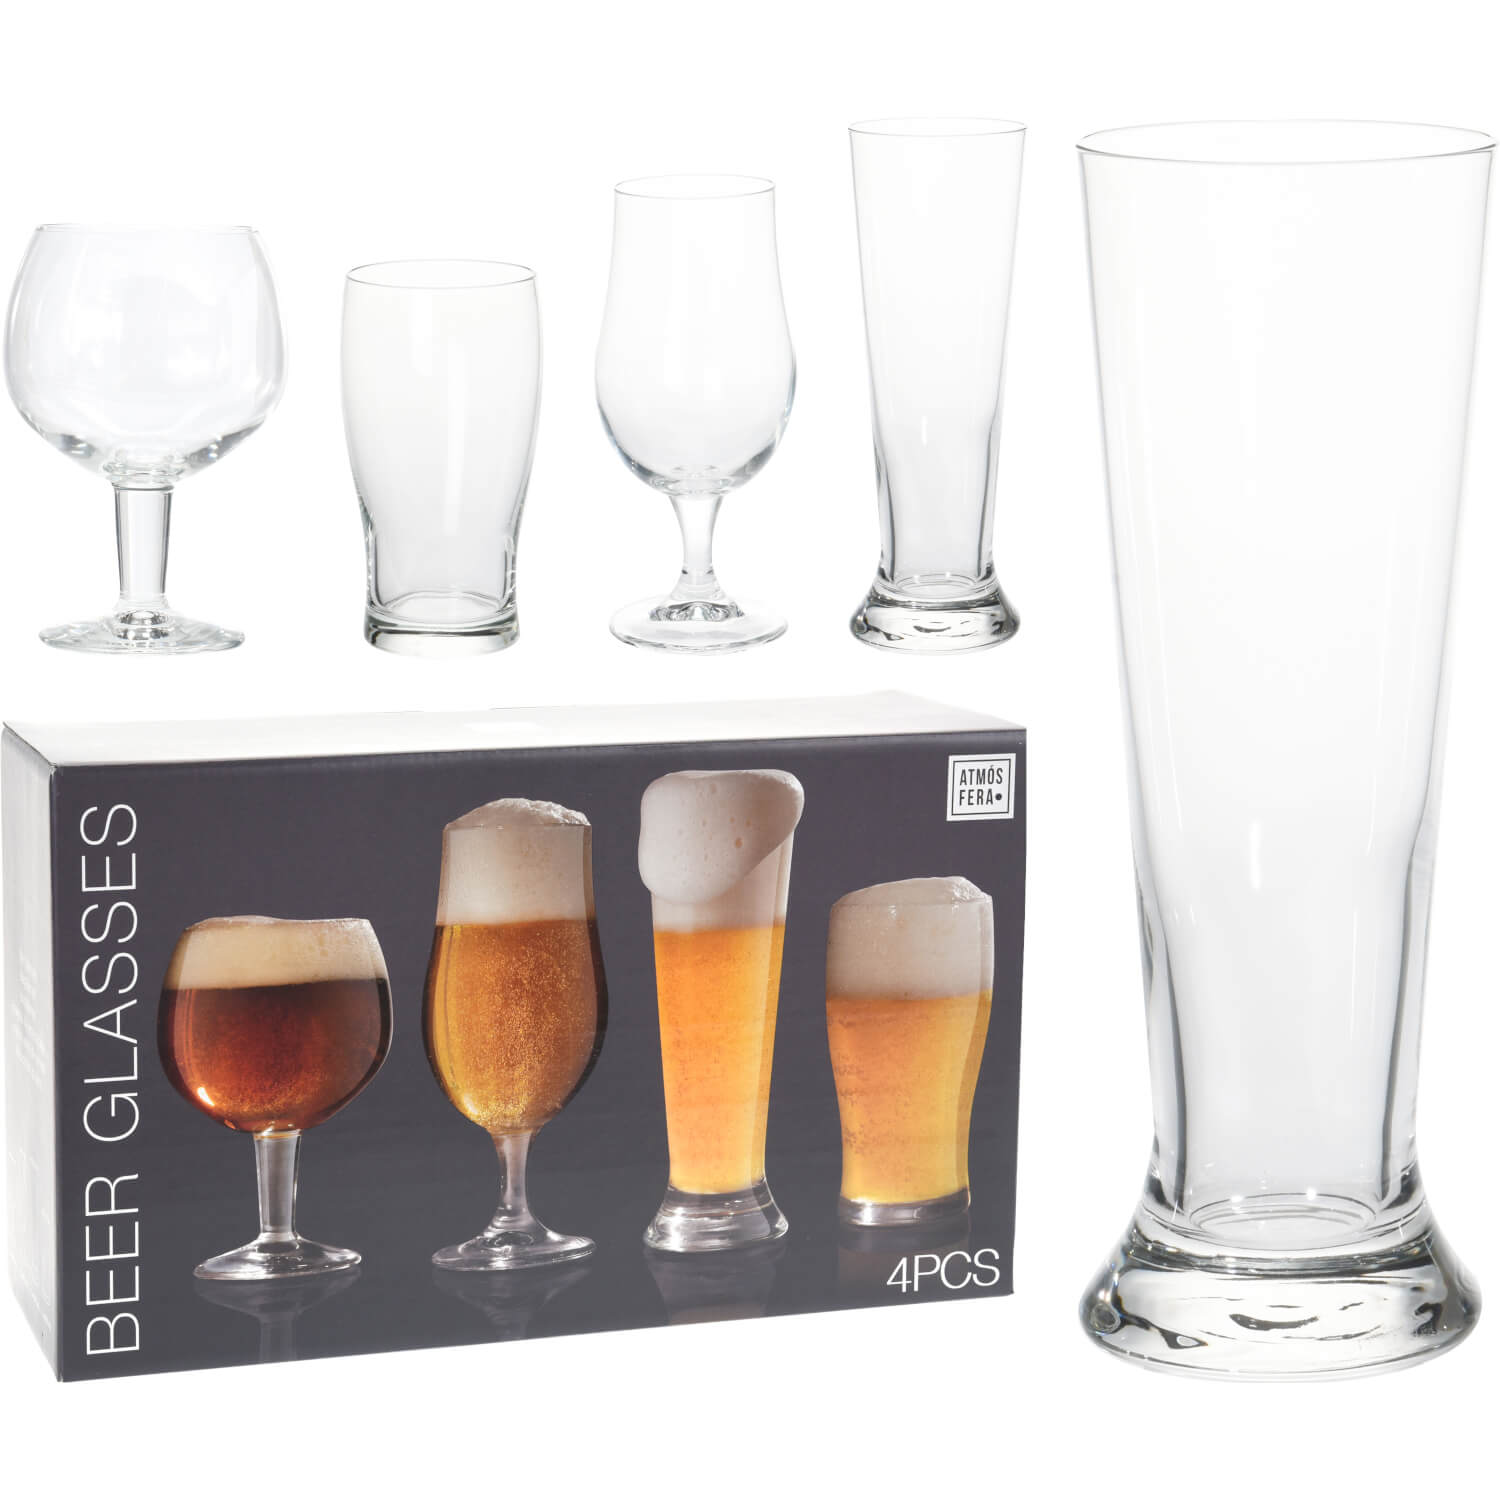 The Home Kitchen Set of 4 Beer Glasses 1 Shaws Department Stores